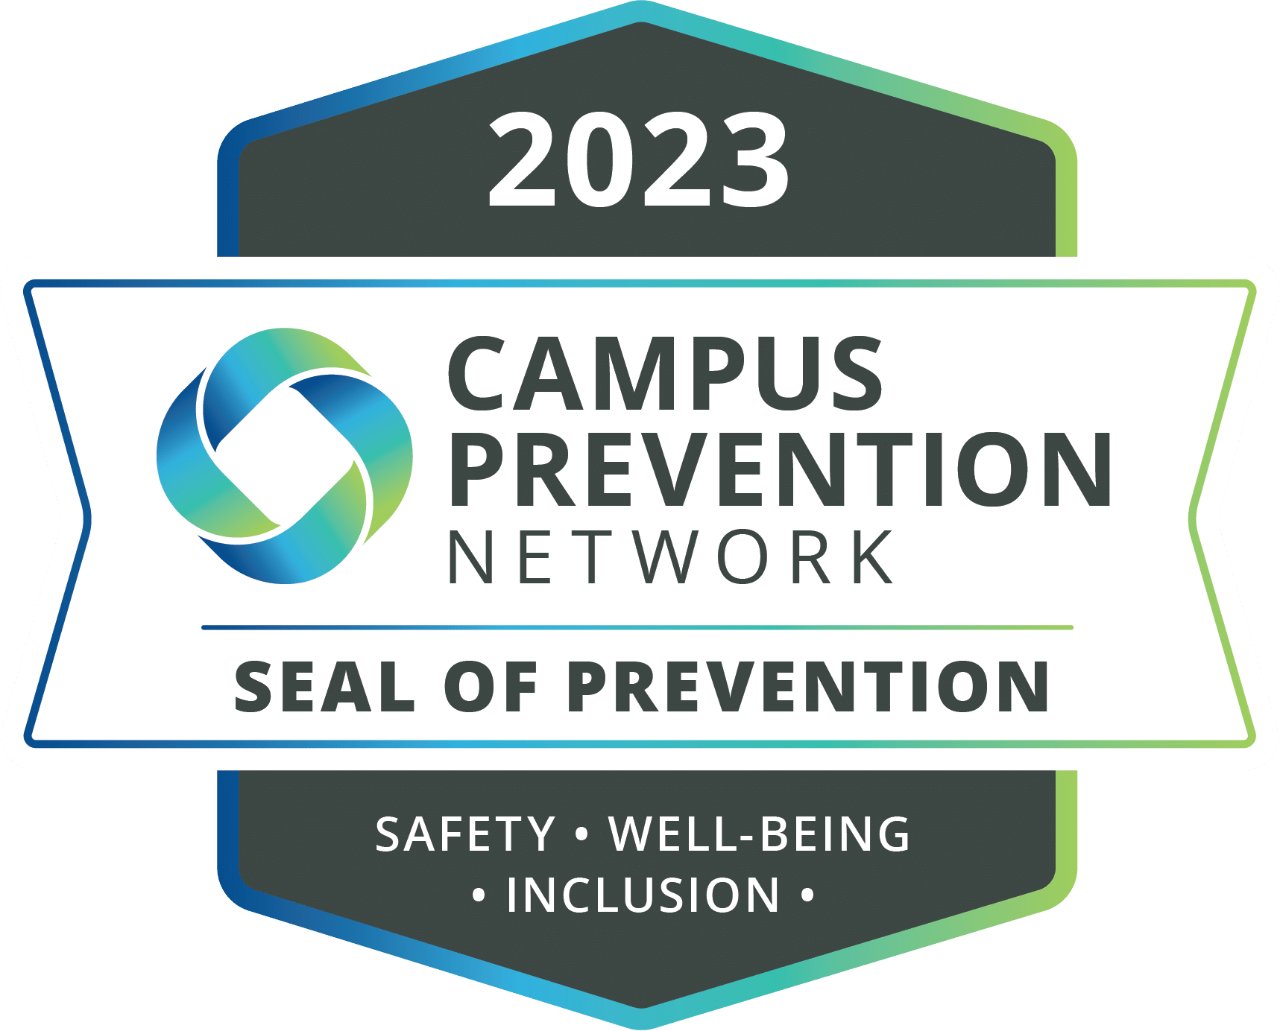 2023 Campus Prevention Network Seal of Prevention